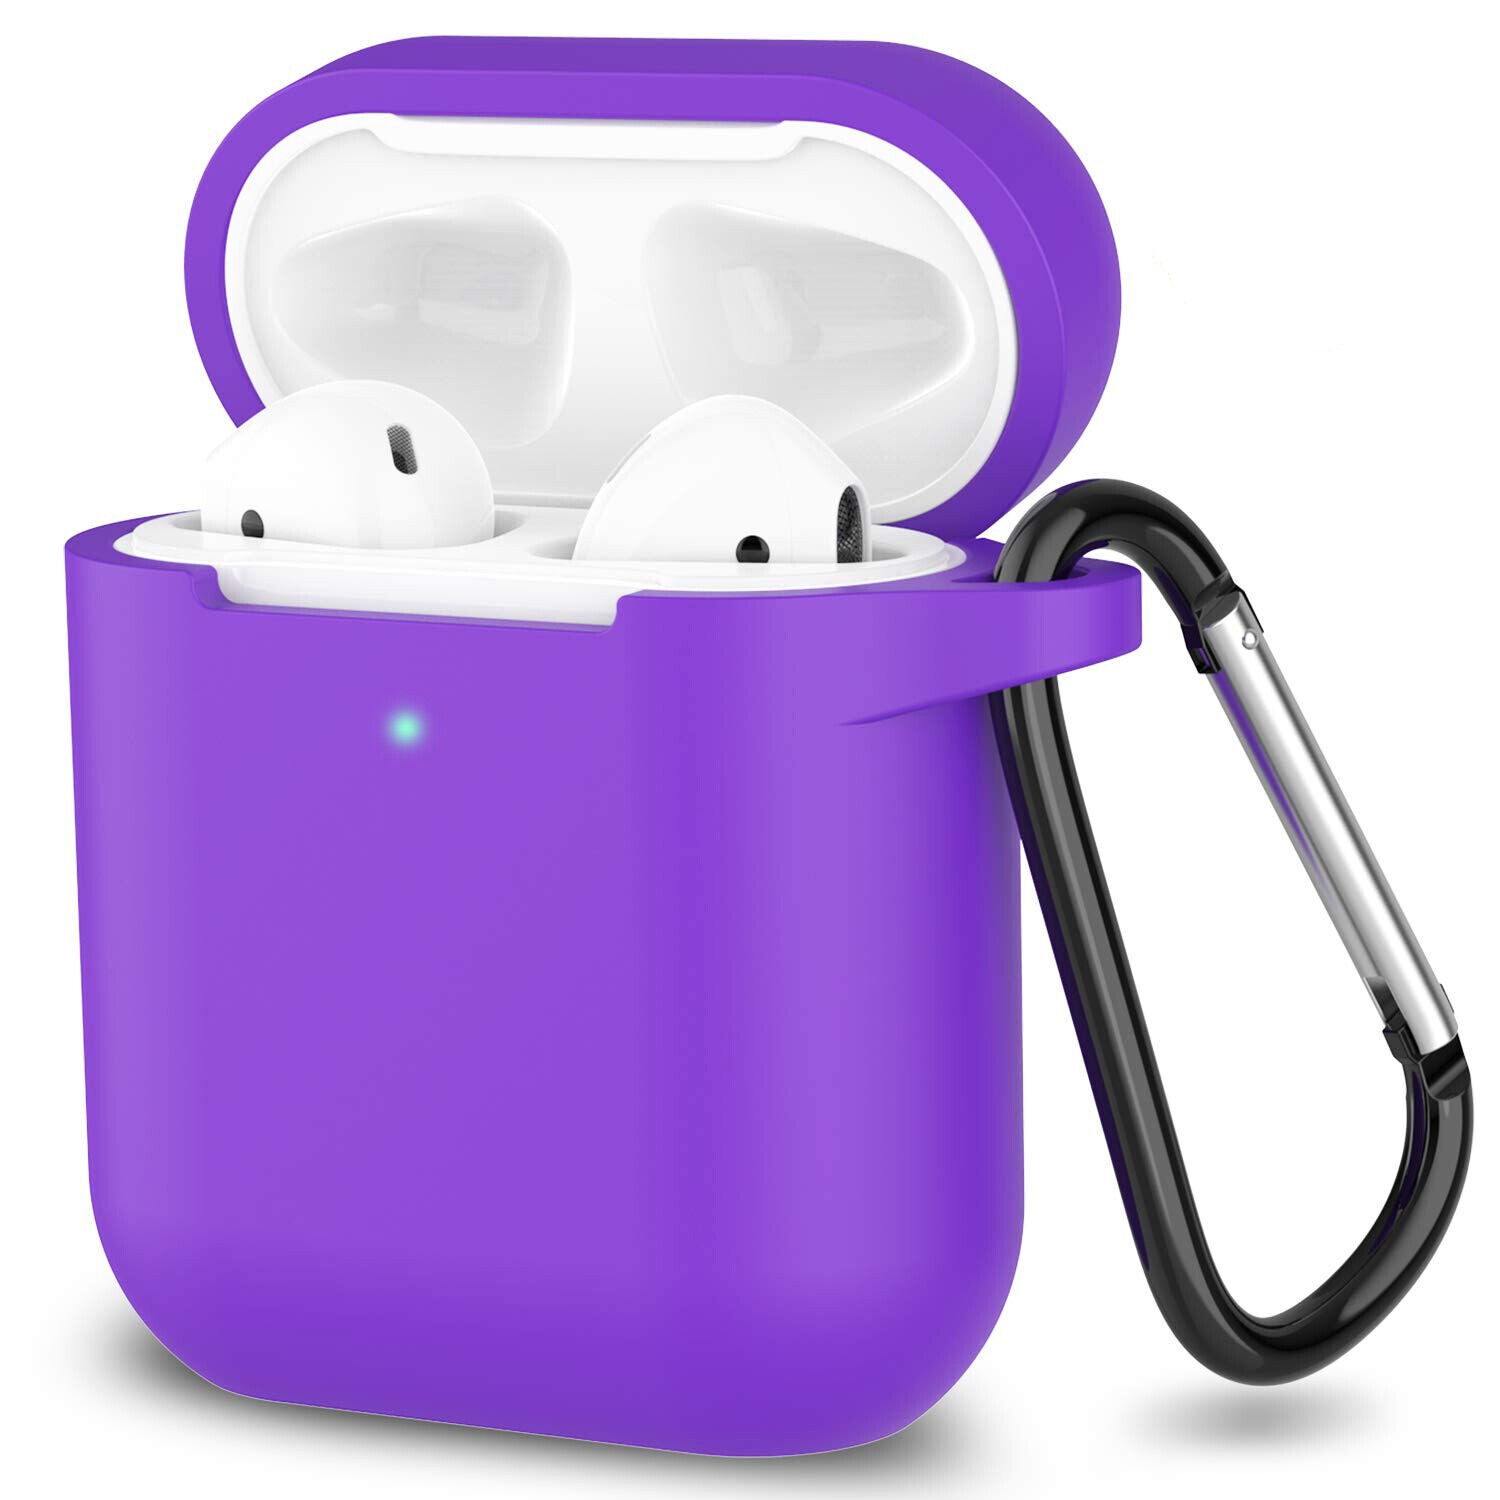 Premium Soft Silicone Skin Shockproof Protective Cover with KEYCHAIN for Airpod 2 / 1 (Purple)